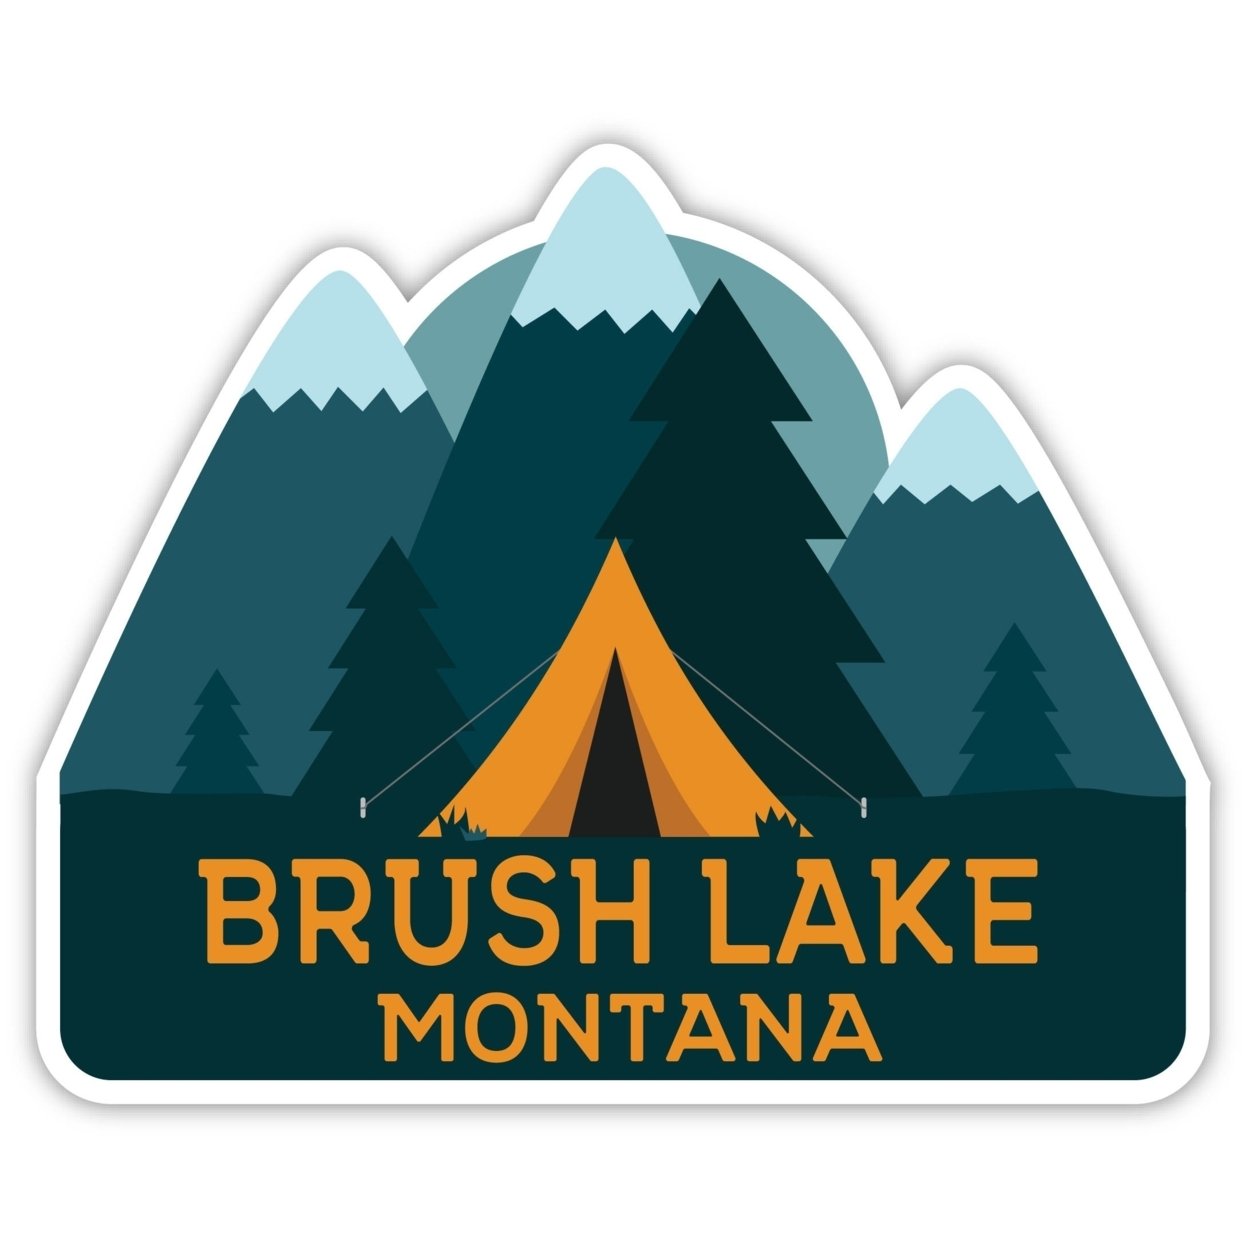 Brush Lake Montana Souvenir Decorative Stickers (Choose Theme And Size) - 4-Pack, 6-Inch, Tent